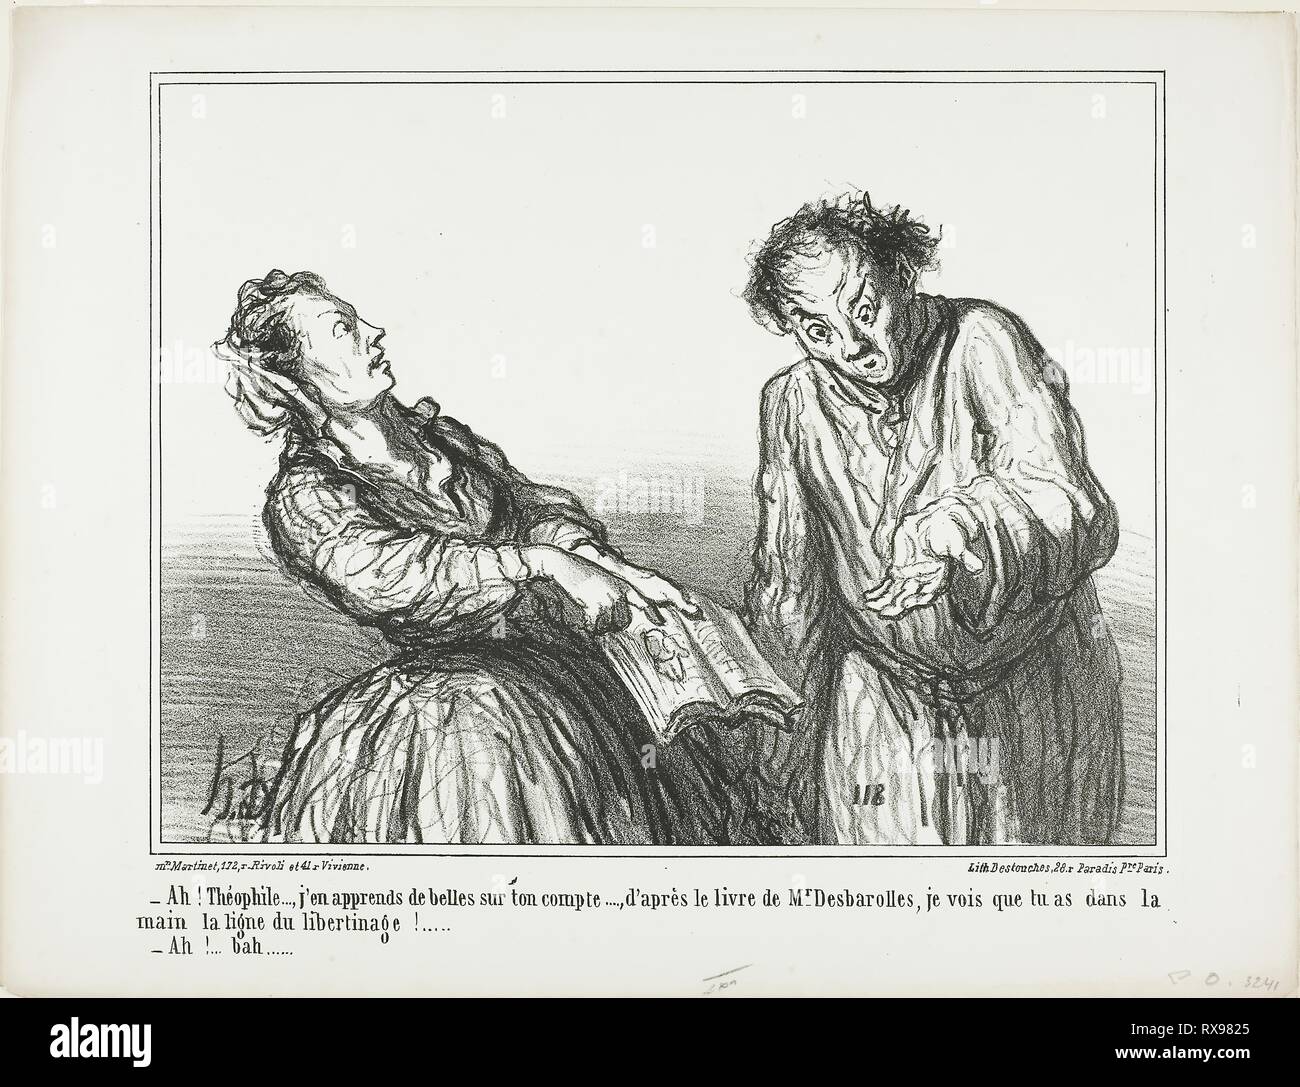 '- Ah, Théophile, what ghastly things I am reading about you. According to the book by Mr. Desbarolles, I can tell that you have in your palm the lines of a libertinage!... - Oh, well...,' plate 1 from Ces Bons Parisiens. Honoré Victorin Daumier; French, 1808-1879. Date: 1860. Dimensions: 210 × 274 mm (image); 274 × 359 mm (sheet). Lithograph in black on white wove paper. Origin: France. Museum: The Chicago Art Institute. Author: Honoré-Victorin Daumier. Stock Photo